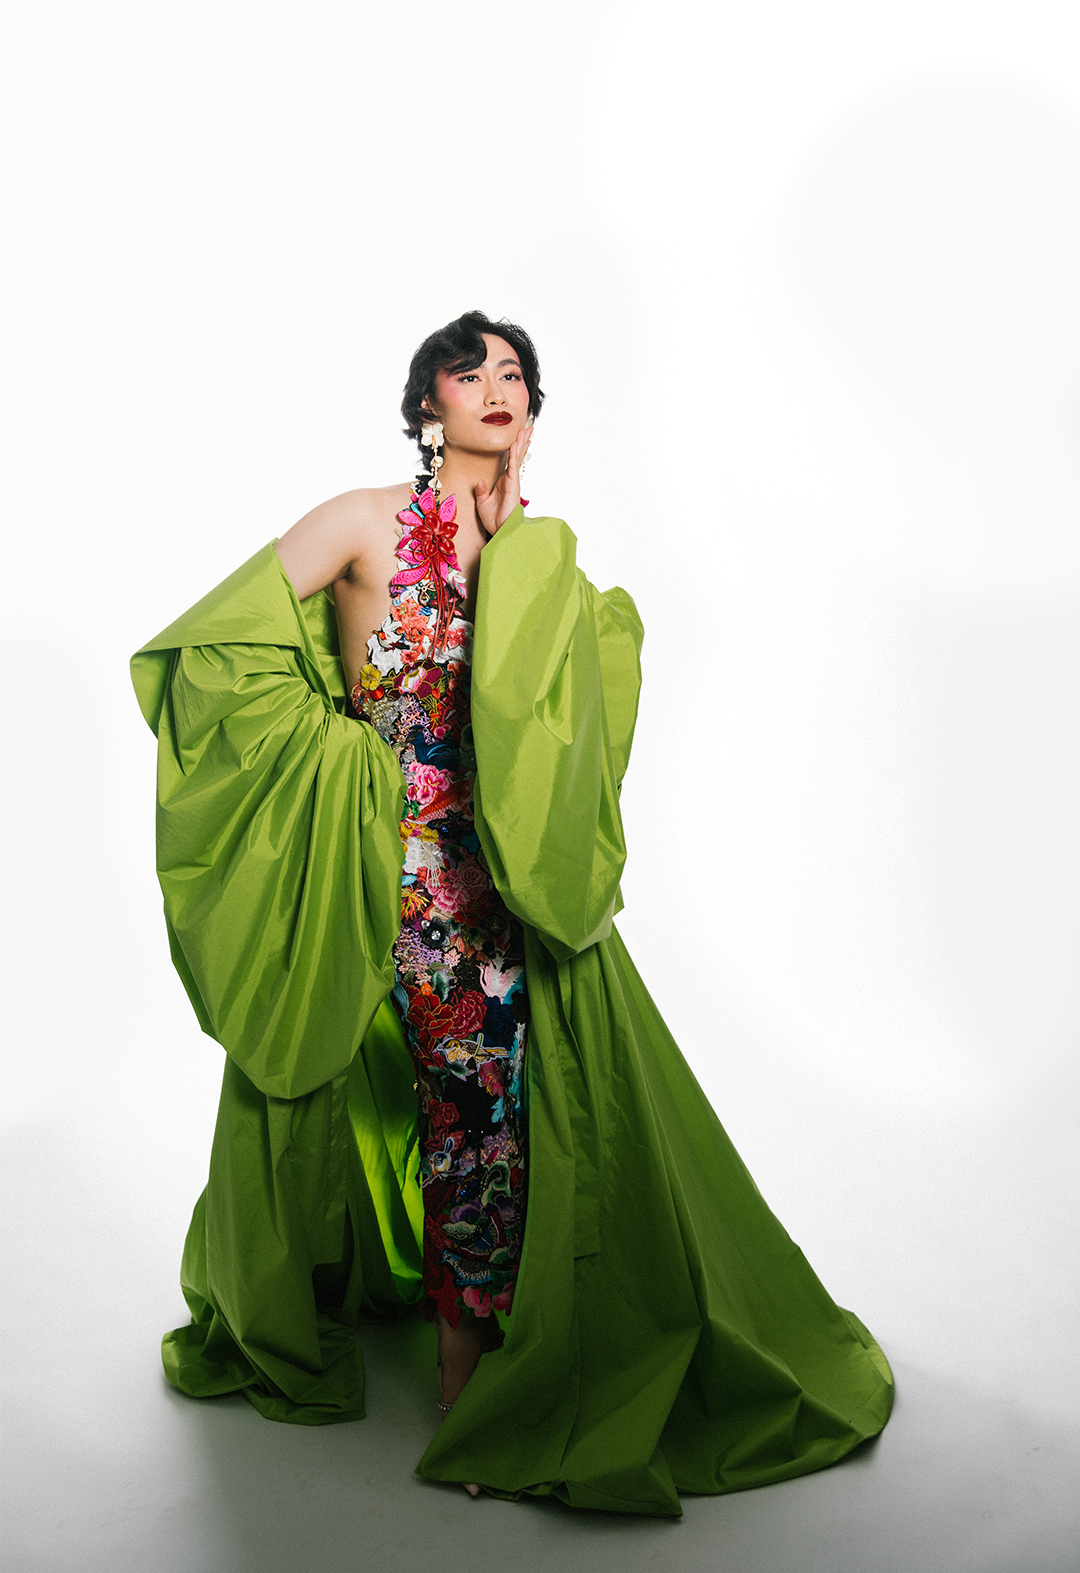 The model is wearing an opera coat in spring-green taffeta and underneath is a halter dress made of embroidery patches, appliqués, and recycled lace collaged and hand-sewn together.